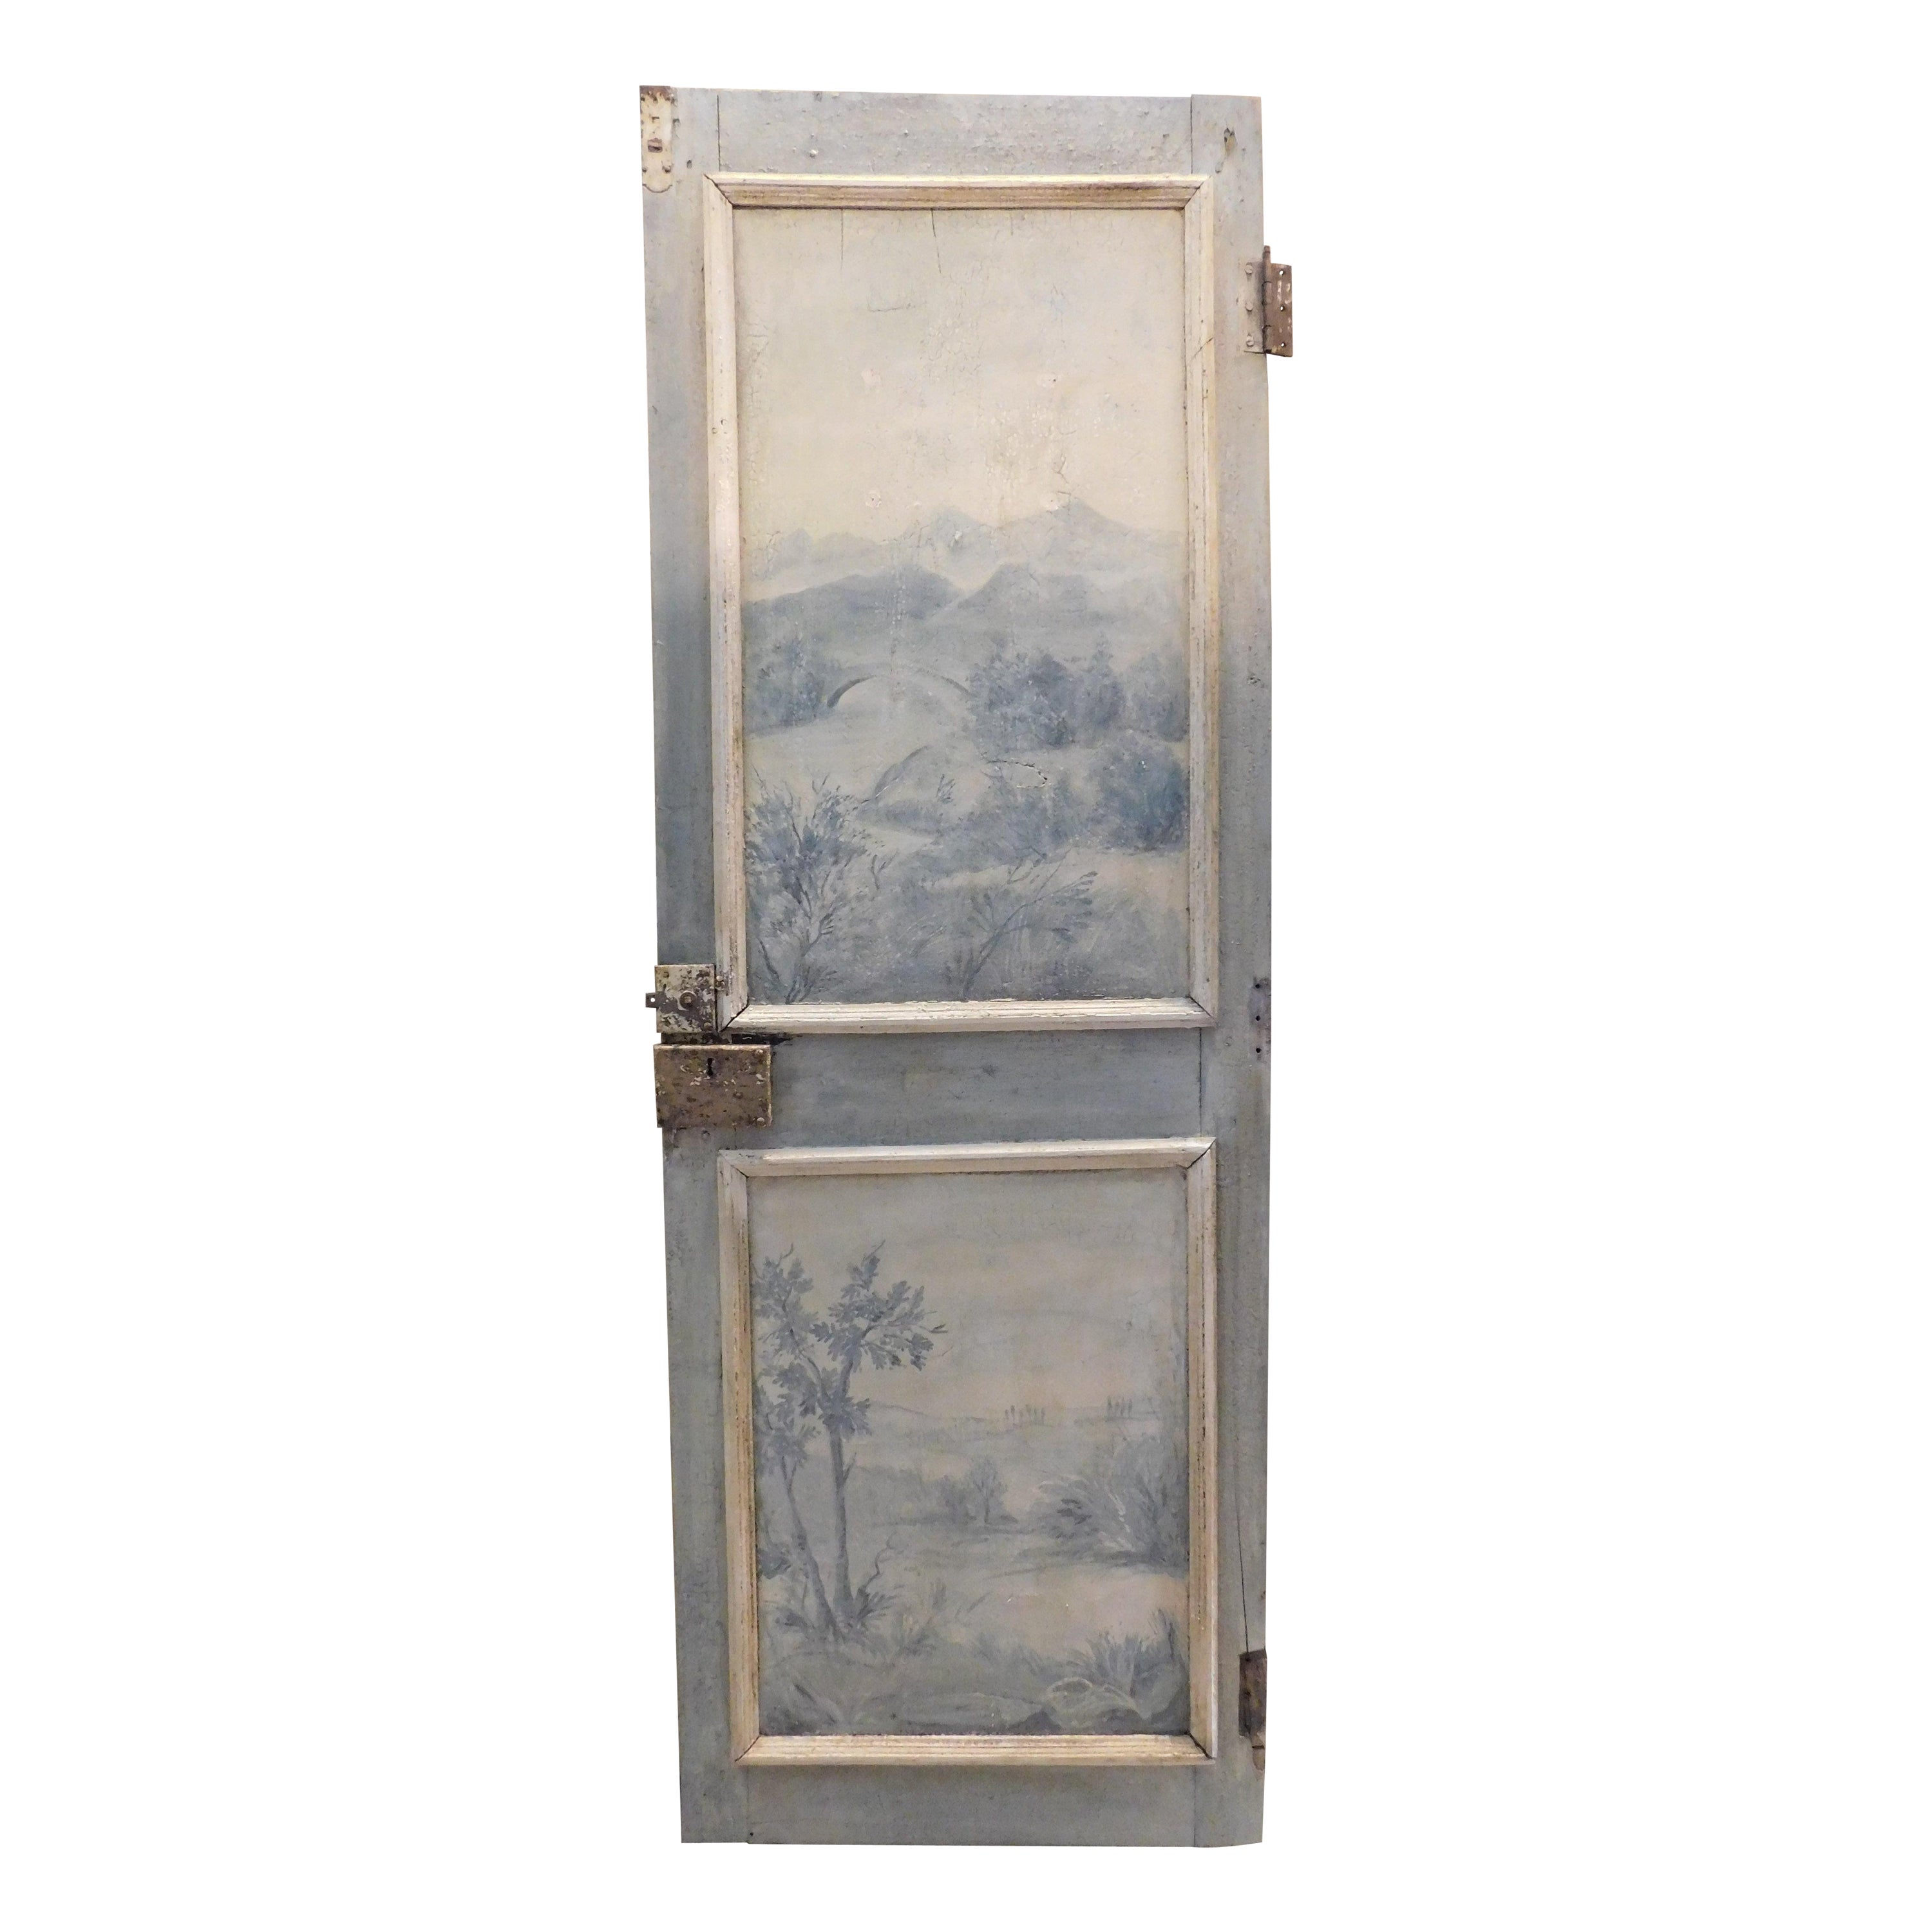 Single-leaf lacquered wooden door, panels painted with landscapes, Italy